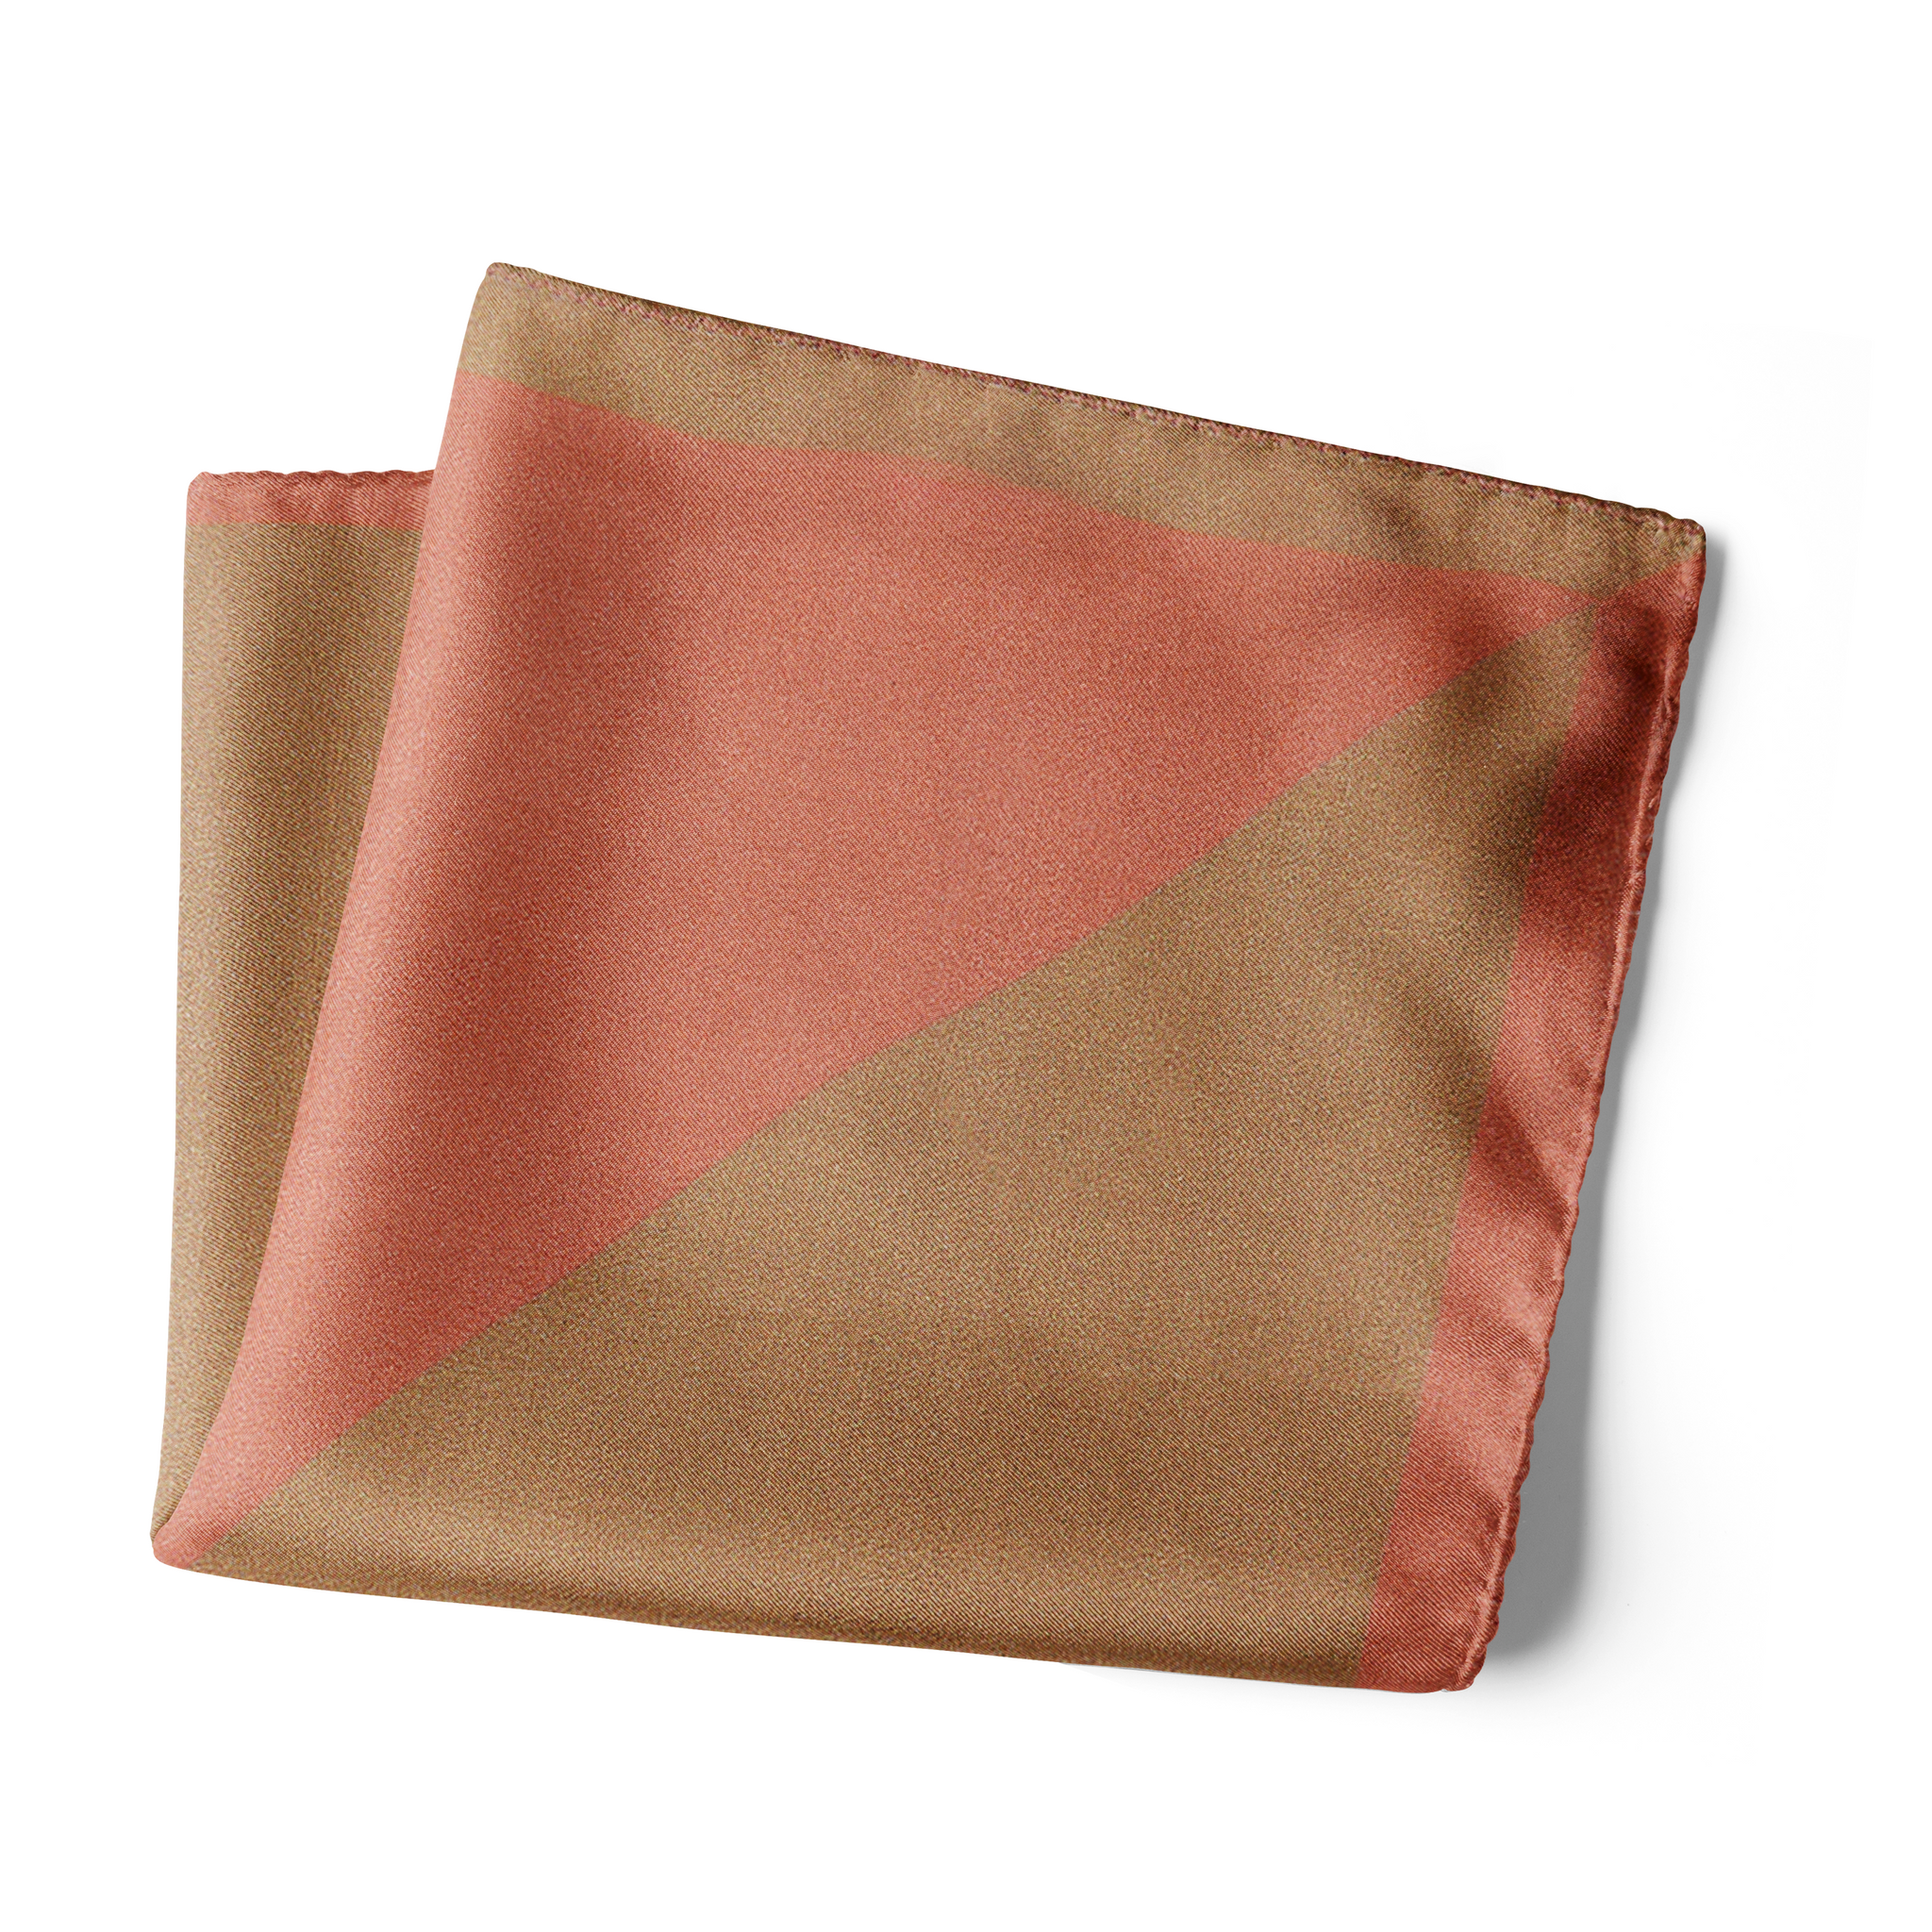 Chokore 2-in-1 Beige & Marsela Silk Pocket Square from the Solids Line